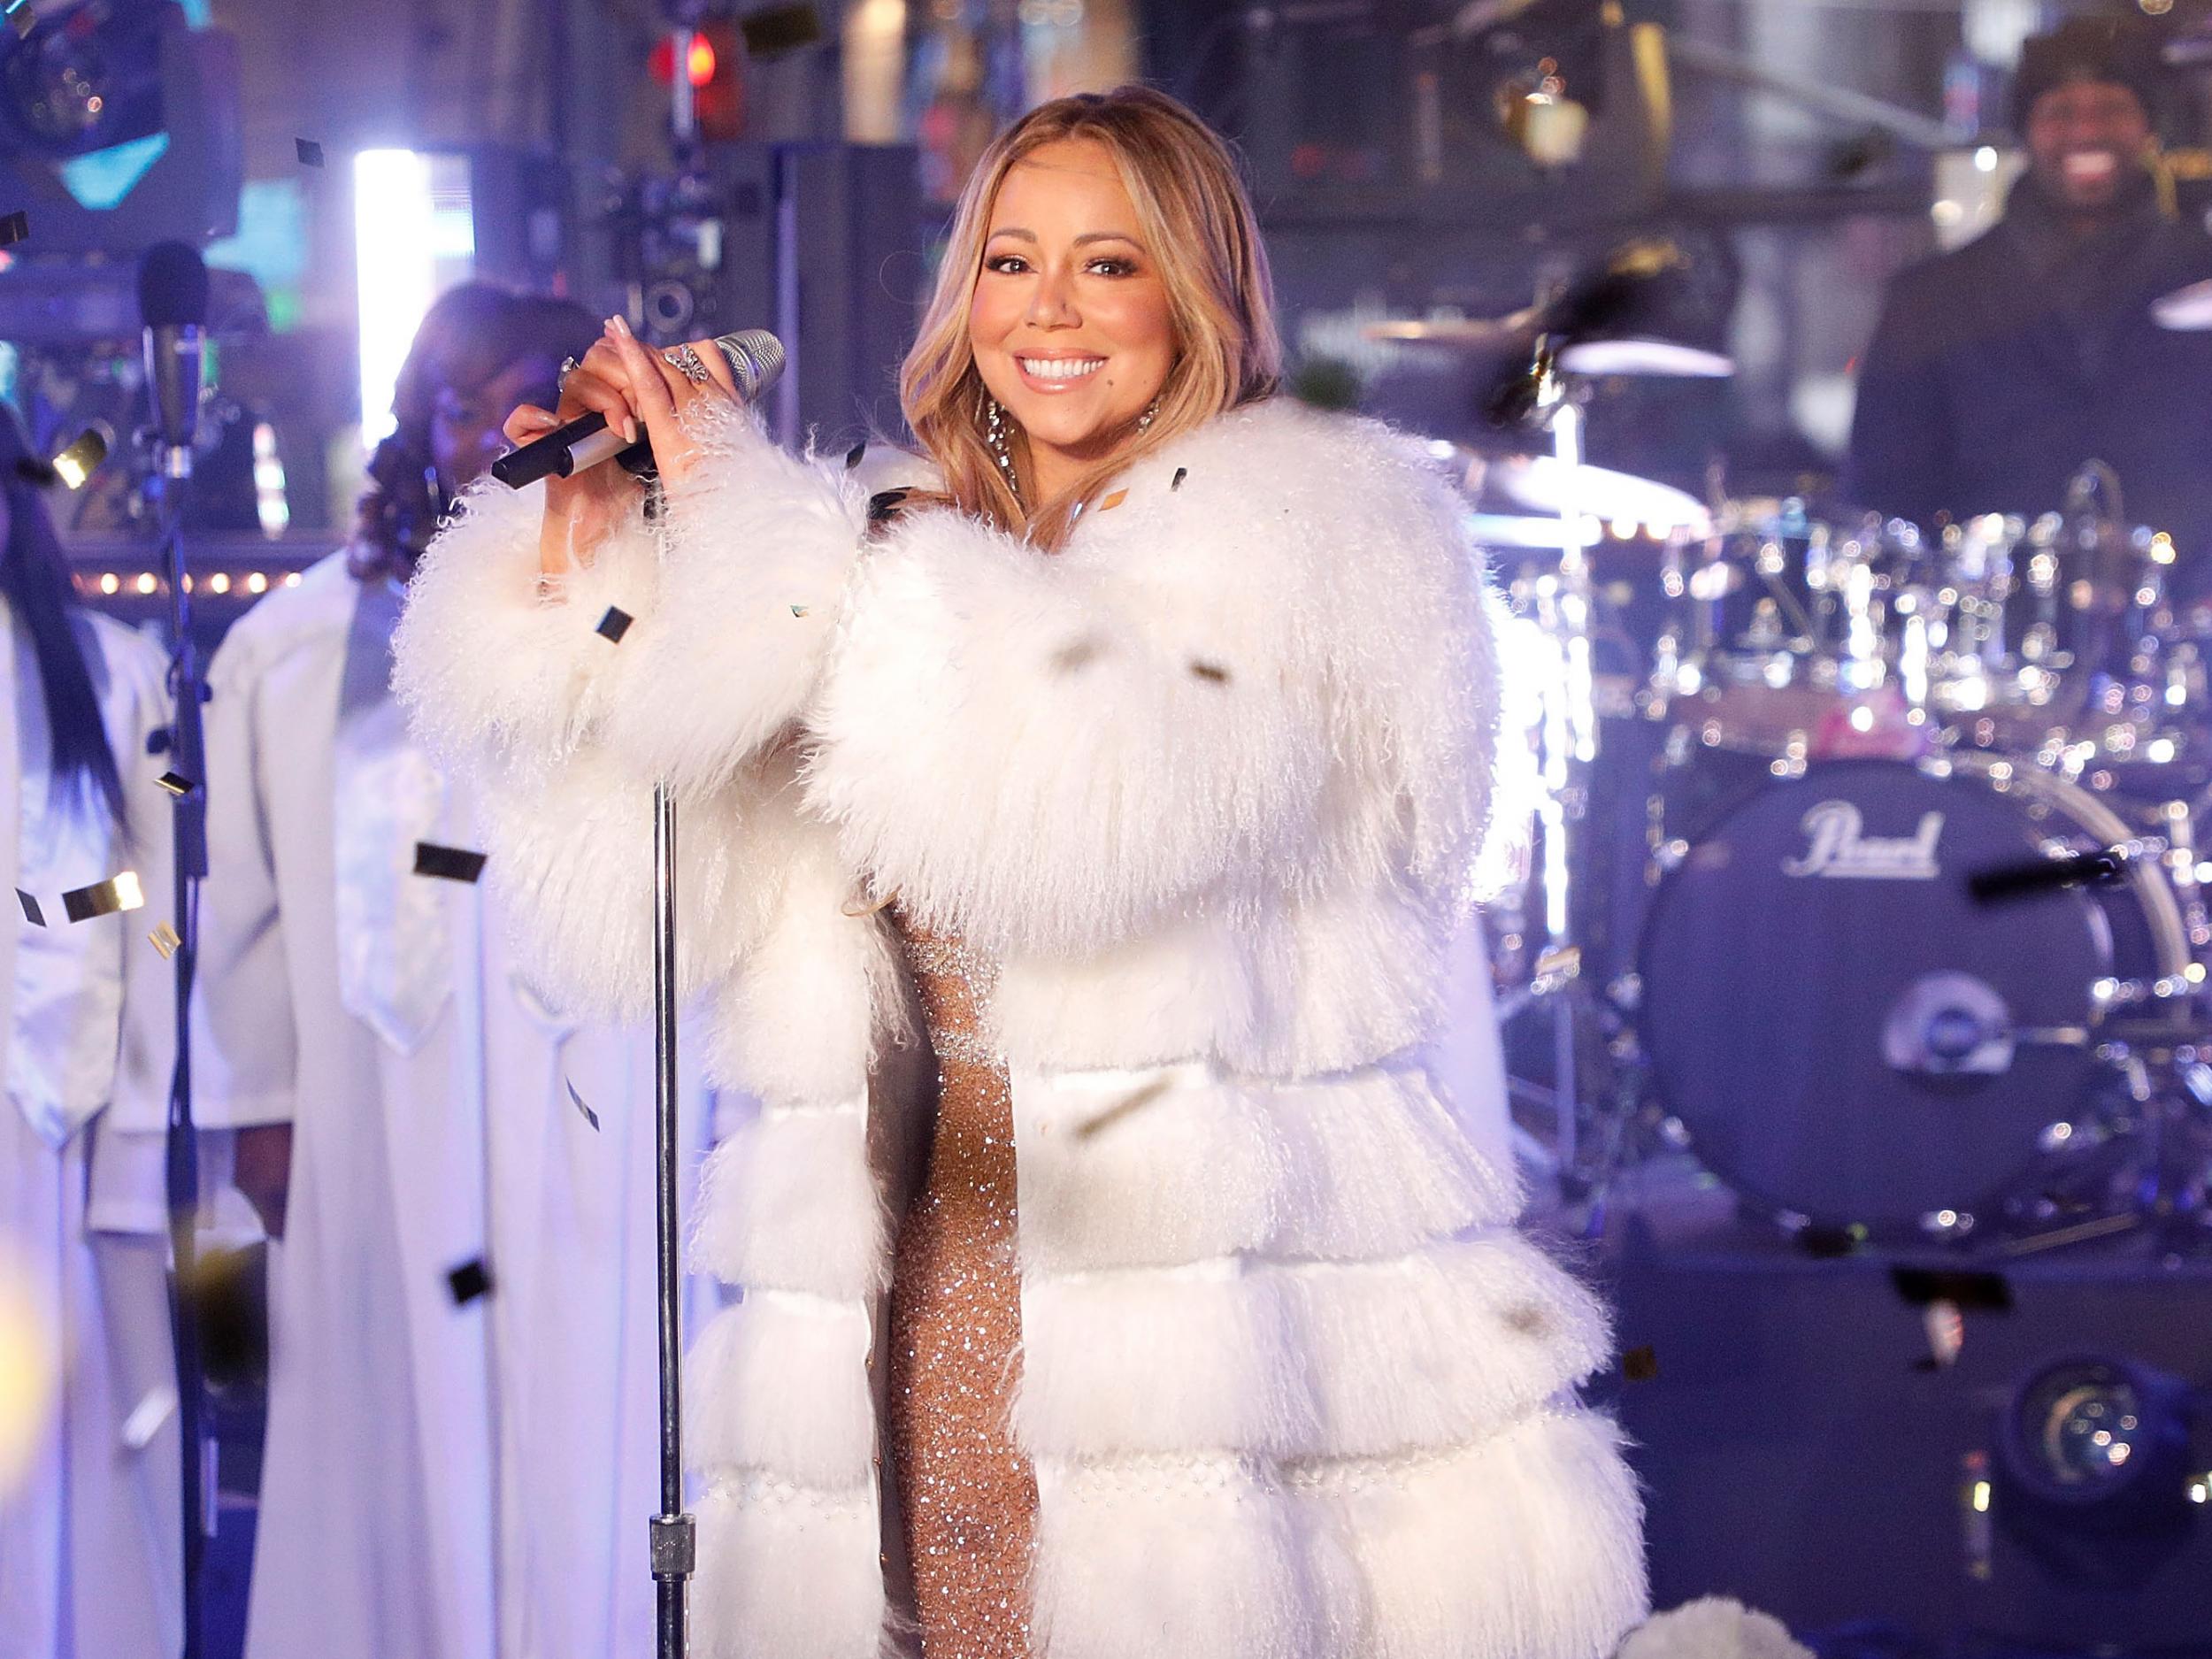 Mariah Carey performs at Times Square on New Year’s Eve